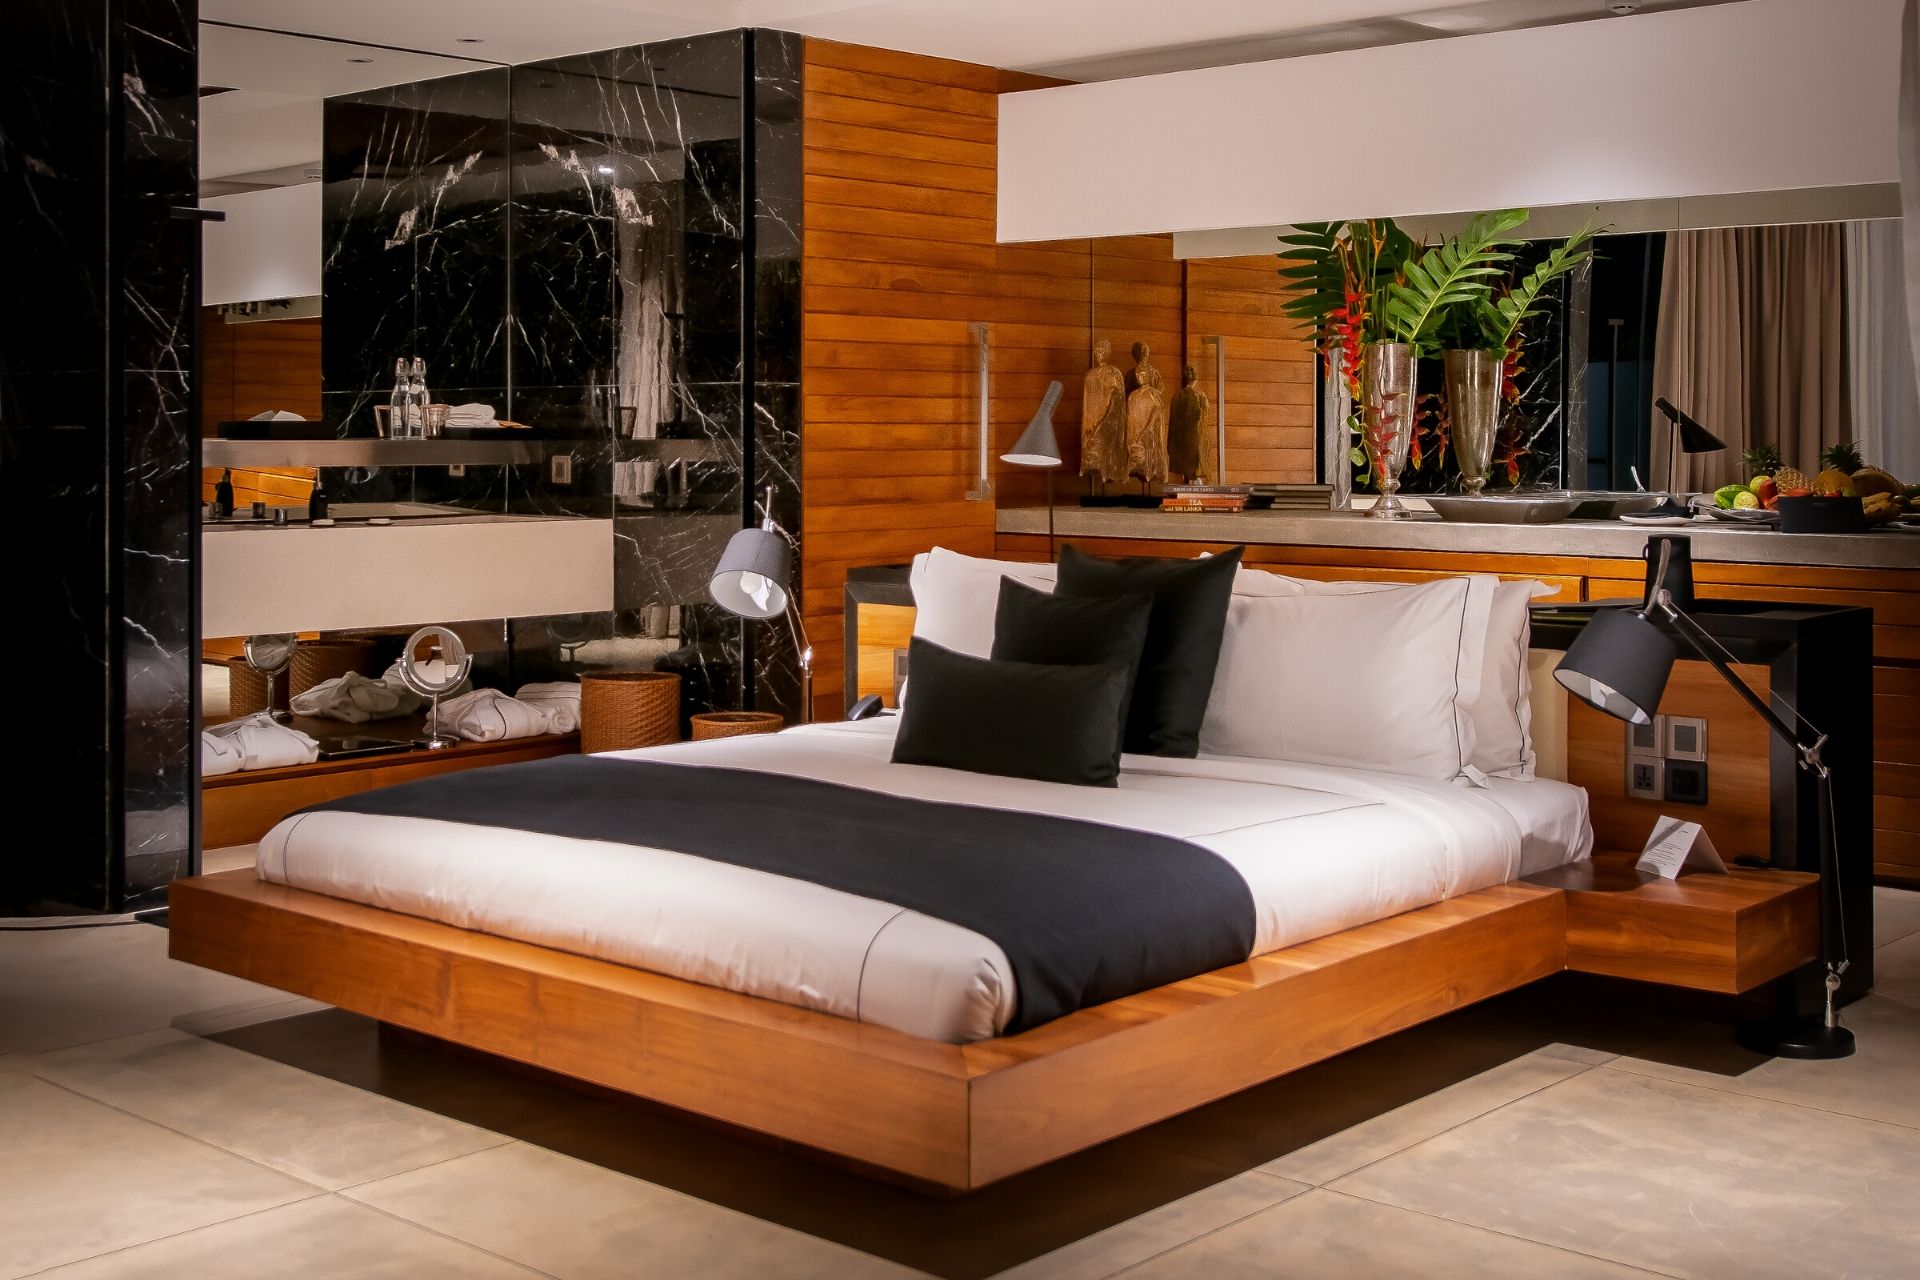 Double Queen bed and view of the interior boutique villa room